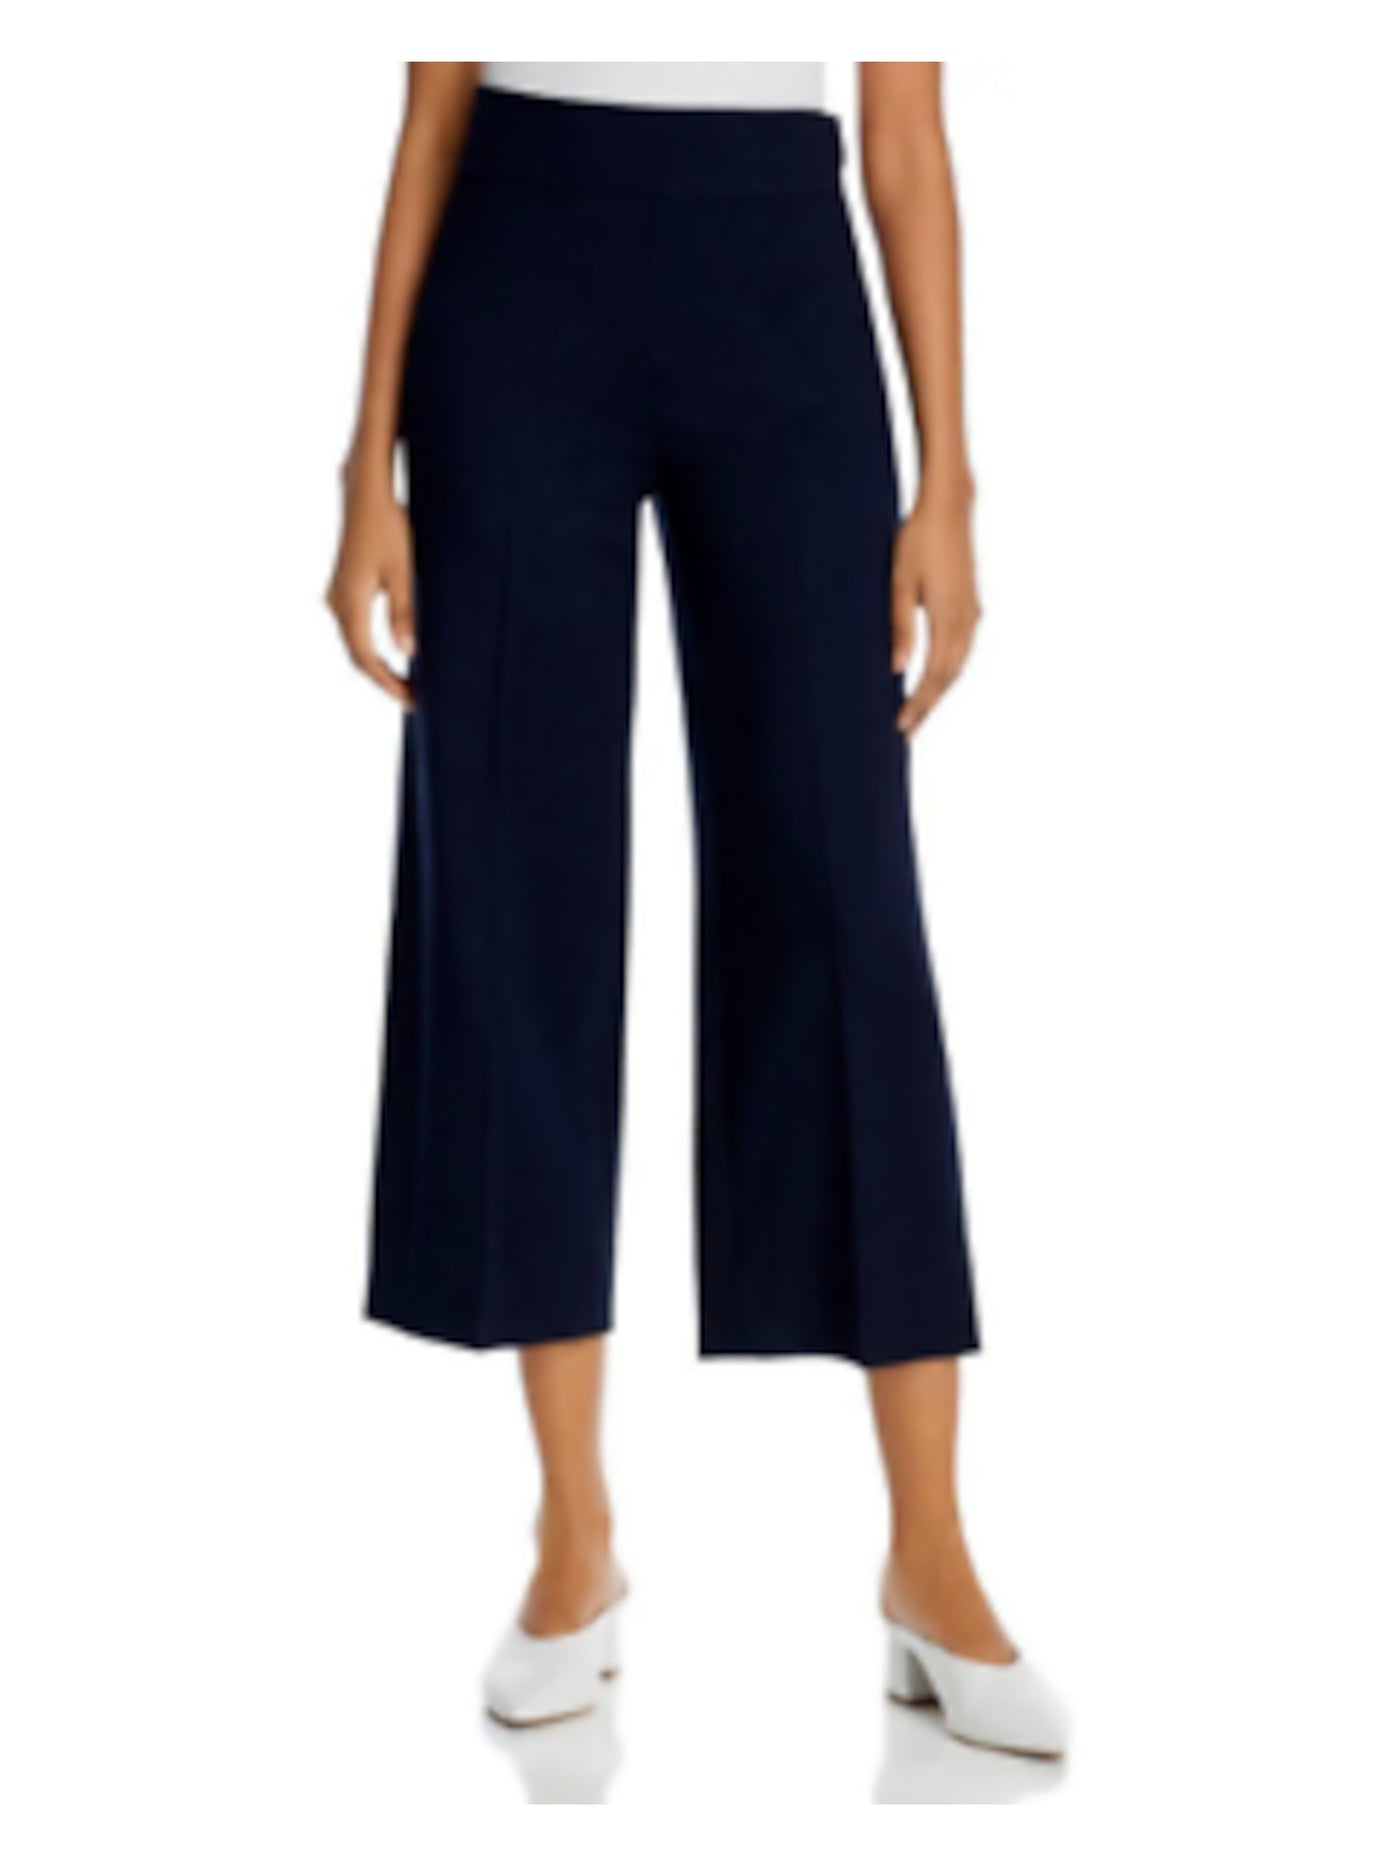 TAILORED REBECCA TAYLOR Womens Navy Zippered Cropped Wear To Work Wide Leg Pants 4